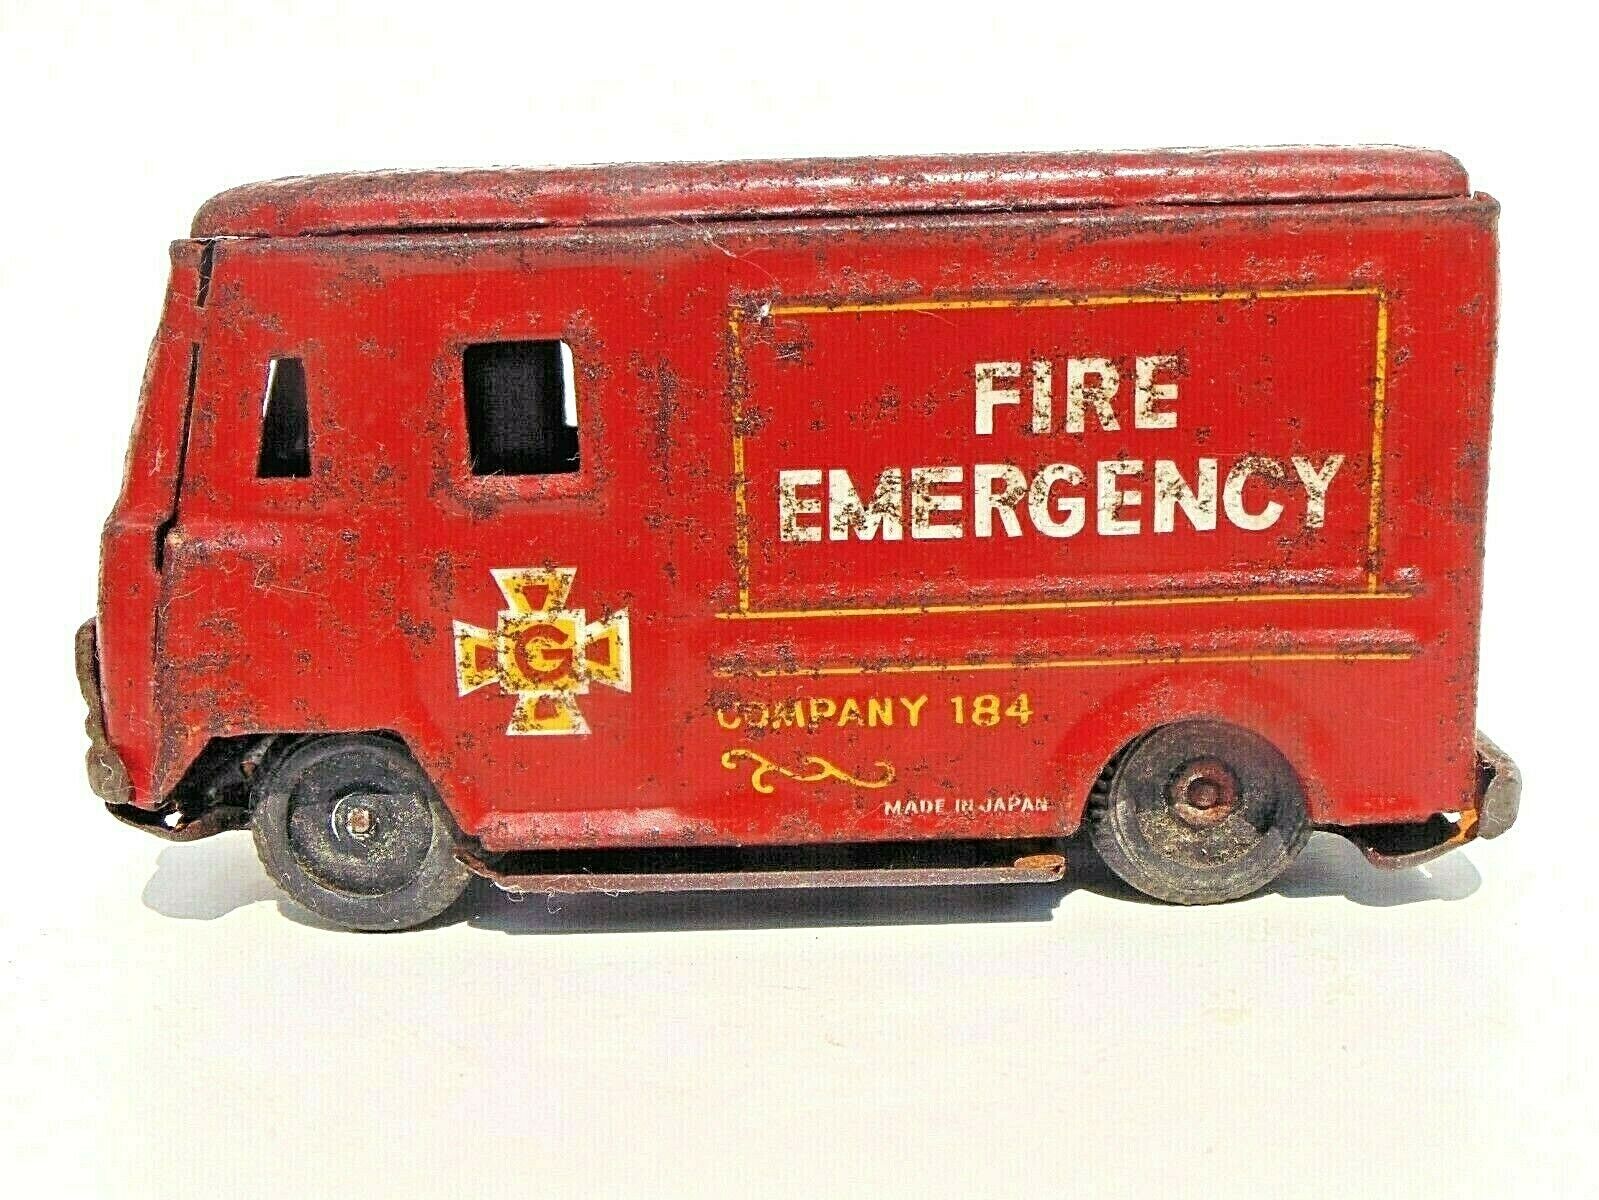 RARE vintage FIRE EMERGENCY toy G TIN TRUCK red COMPANY 184 JAPAN 1950's $9.95